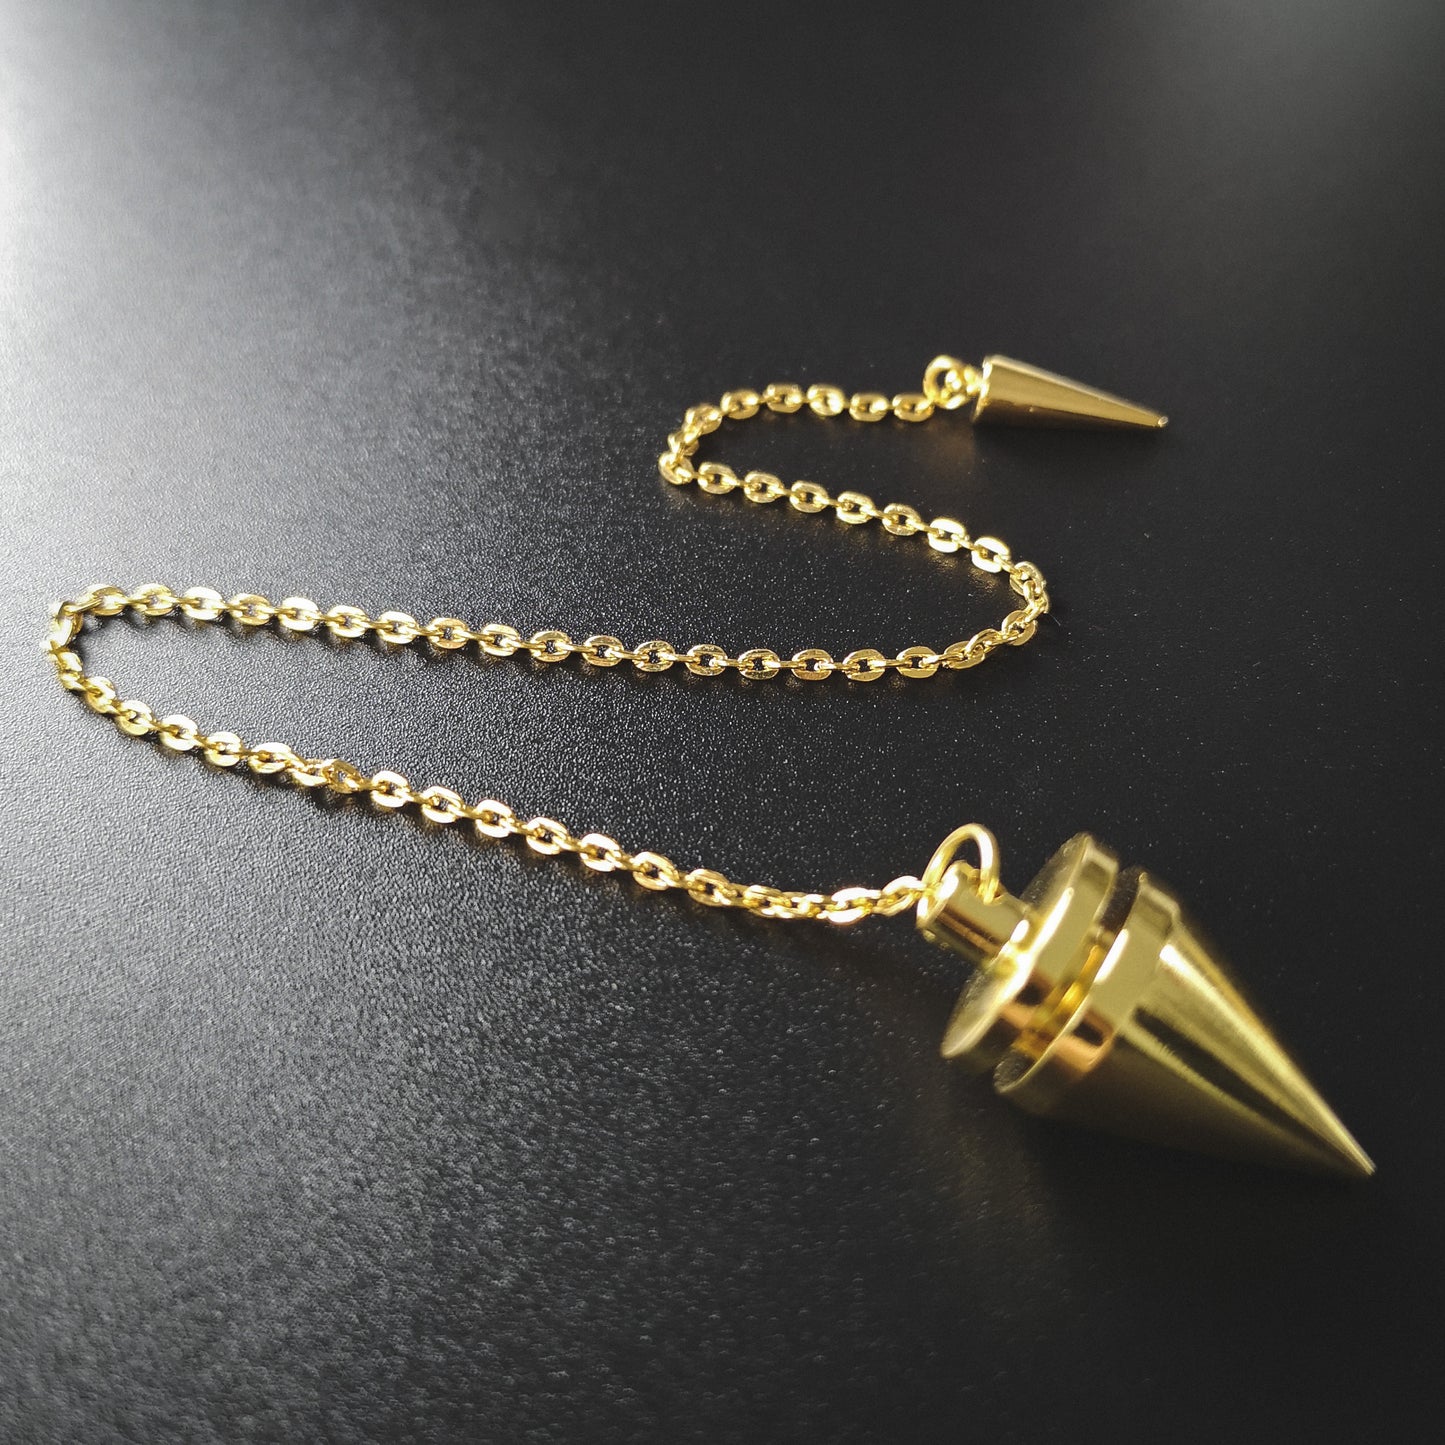 Golden cone and coil classic dowsing metal pendulum with a spike charm - The French Witch shop